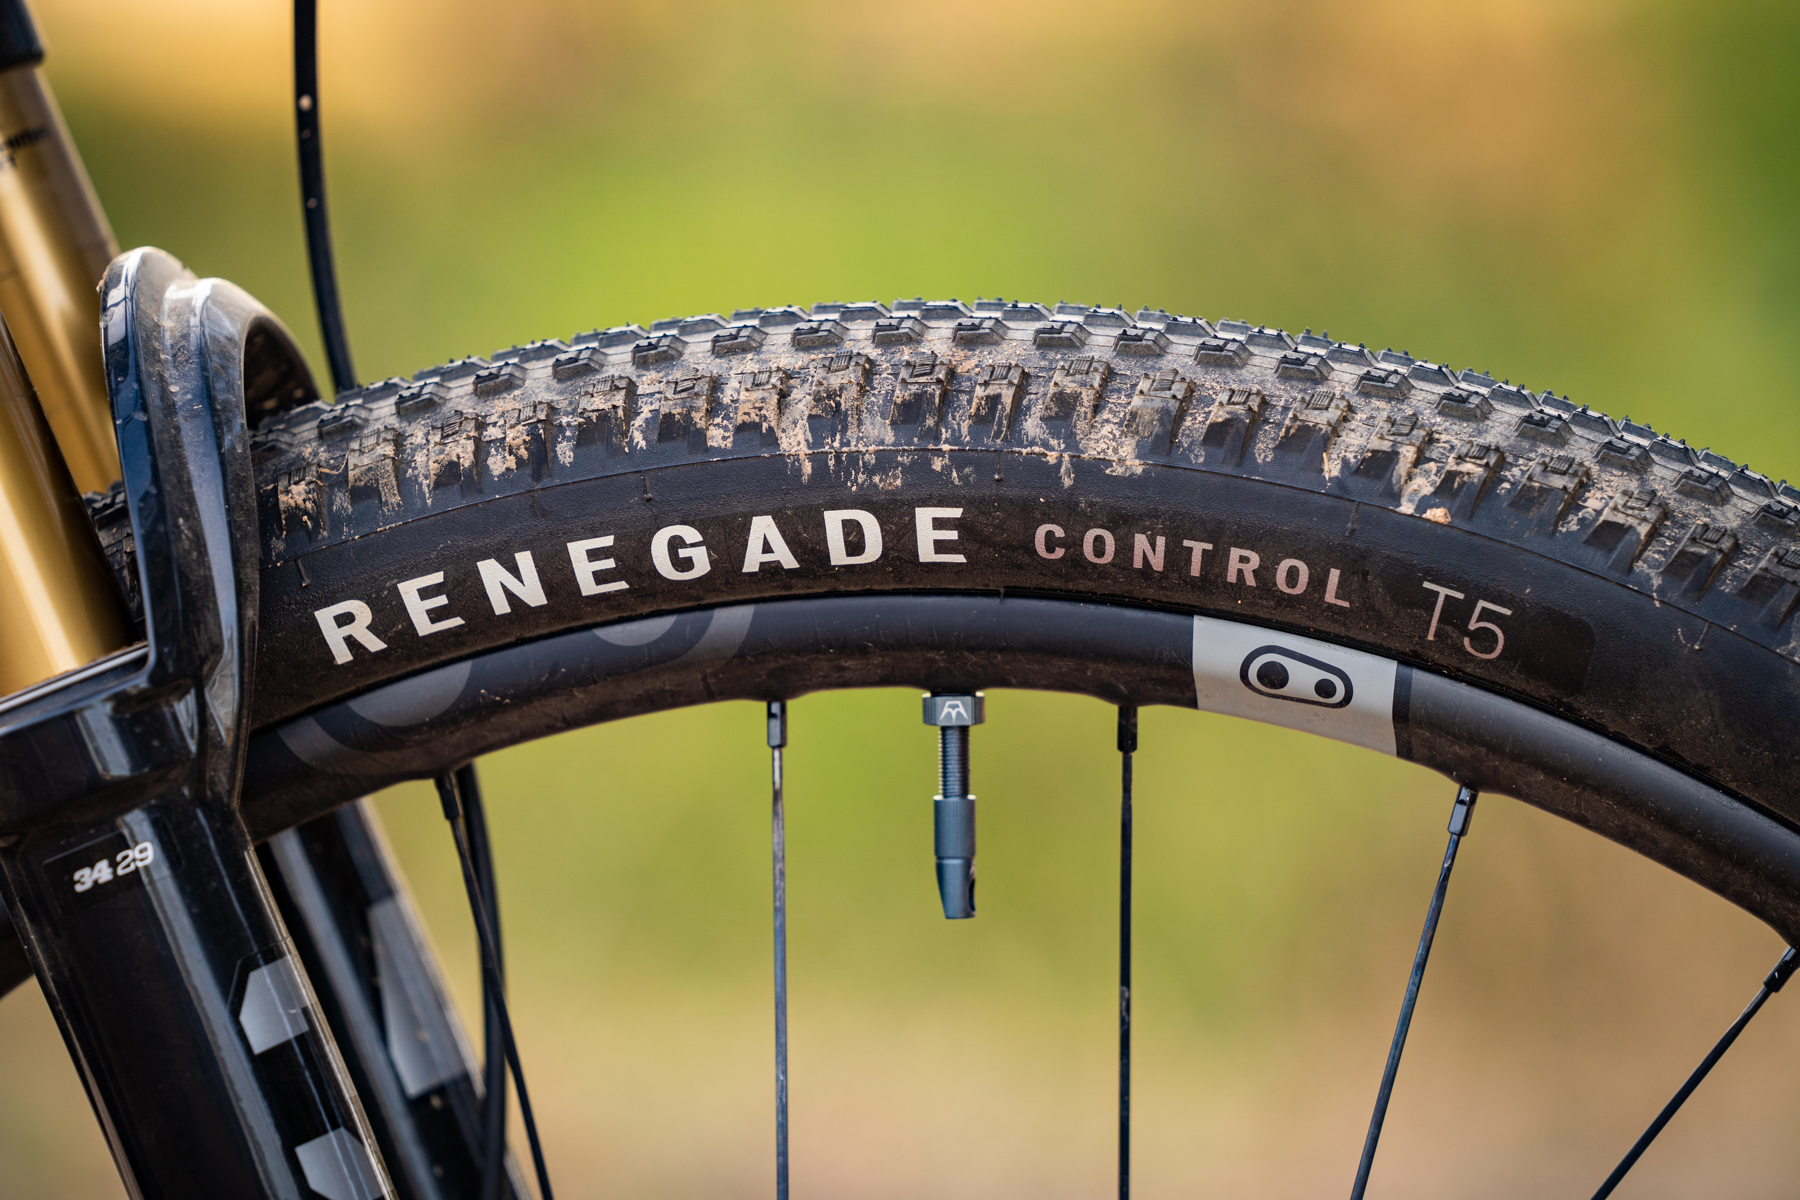 specialized chisel ltd renegade control t5 2.35in tyres tires